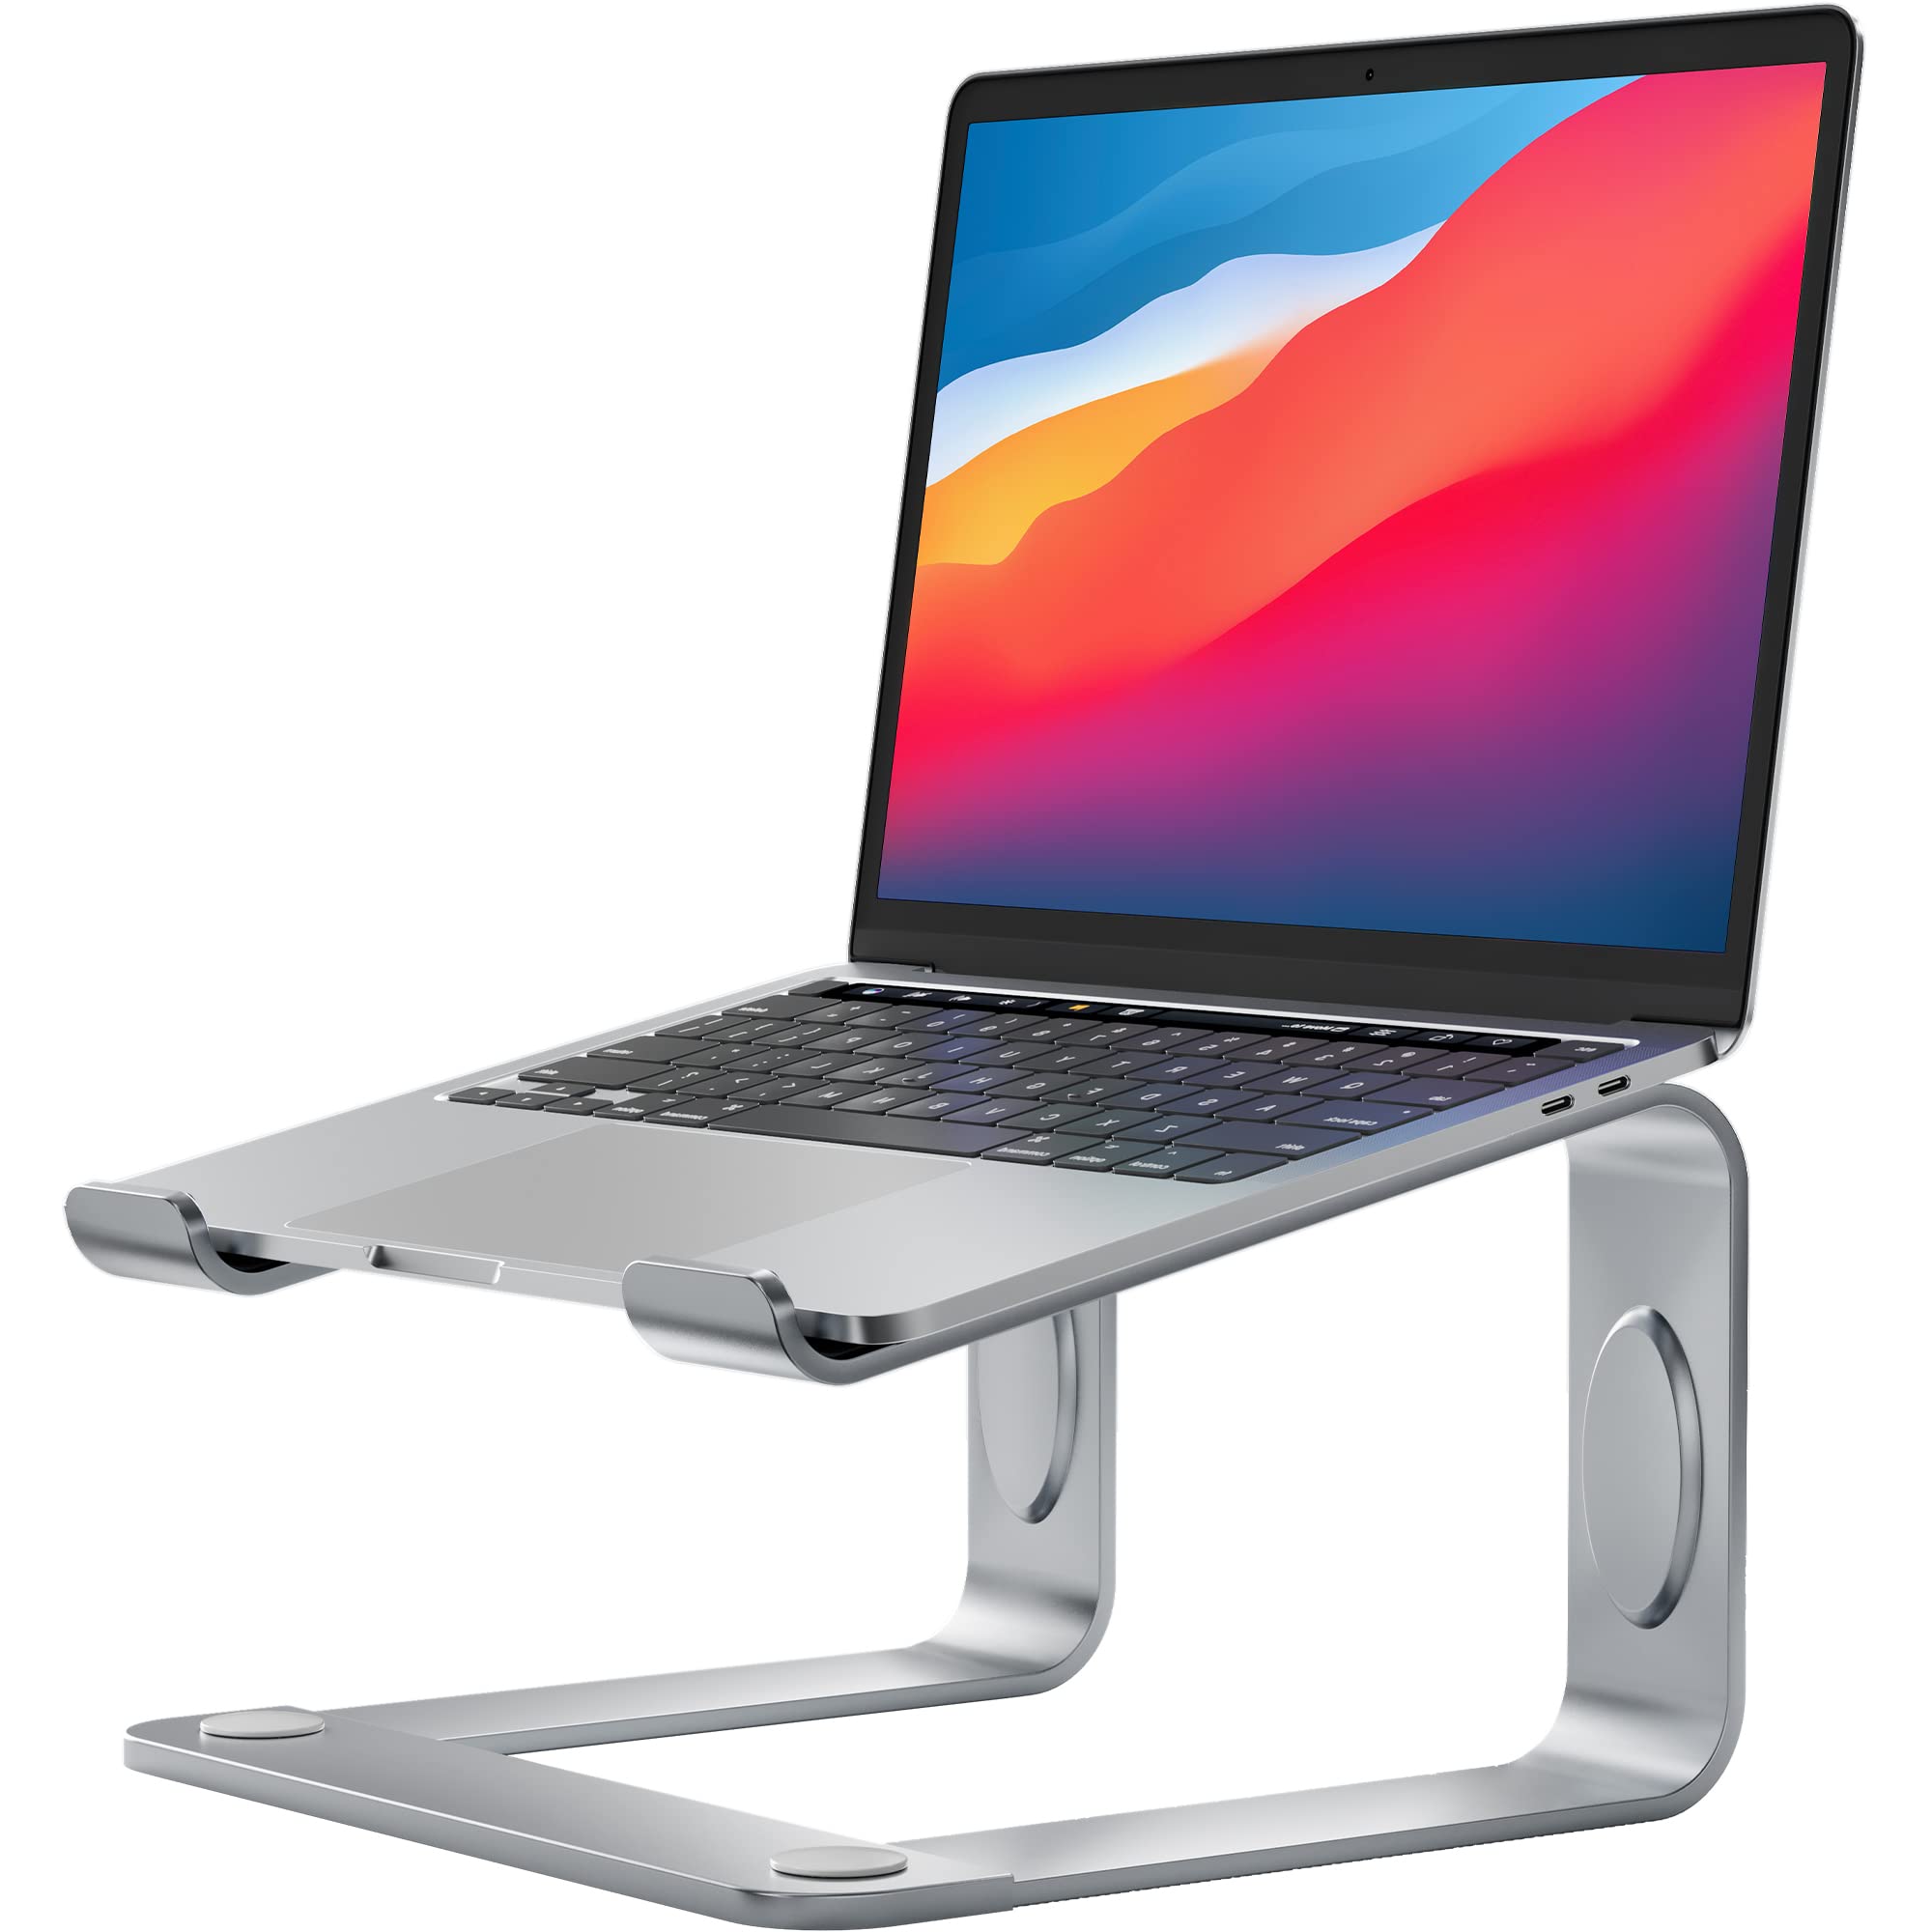 LORYERGO Laptop Stand for Desk Compatible with Most 10 to 15.6 Inches Laptops $8.59